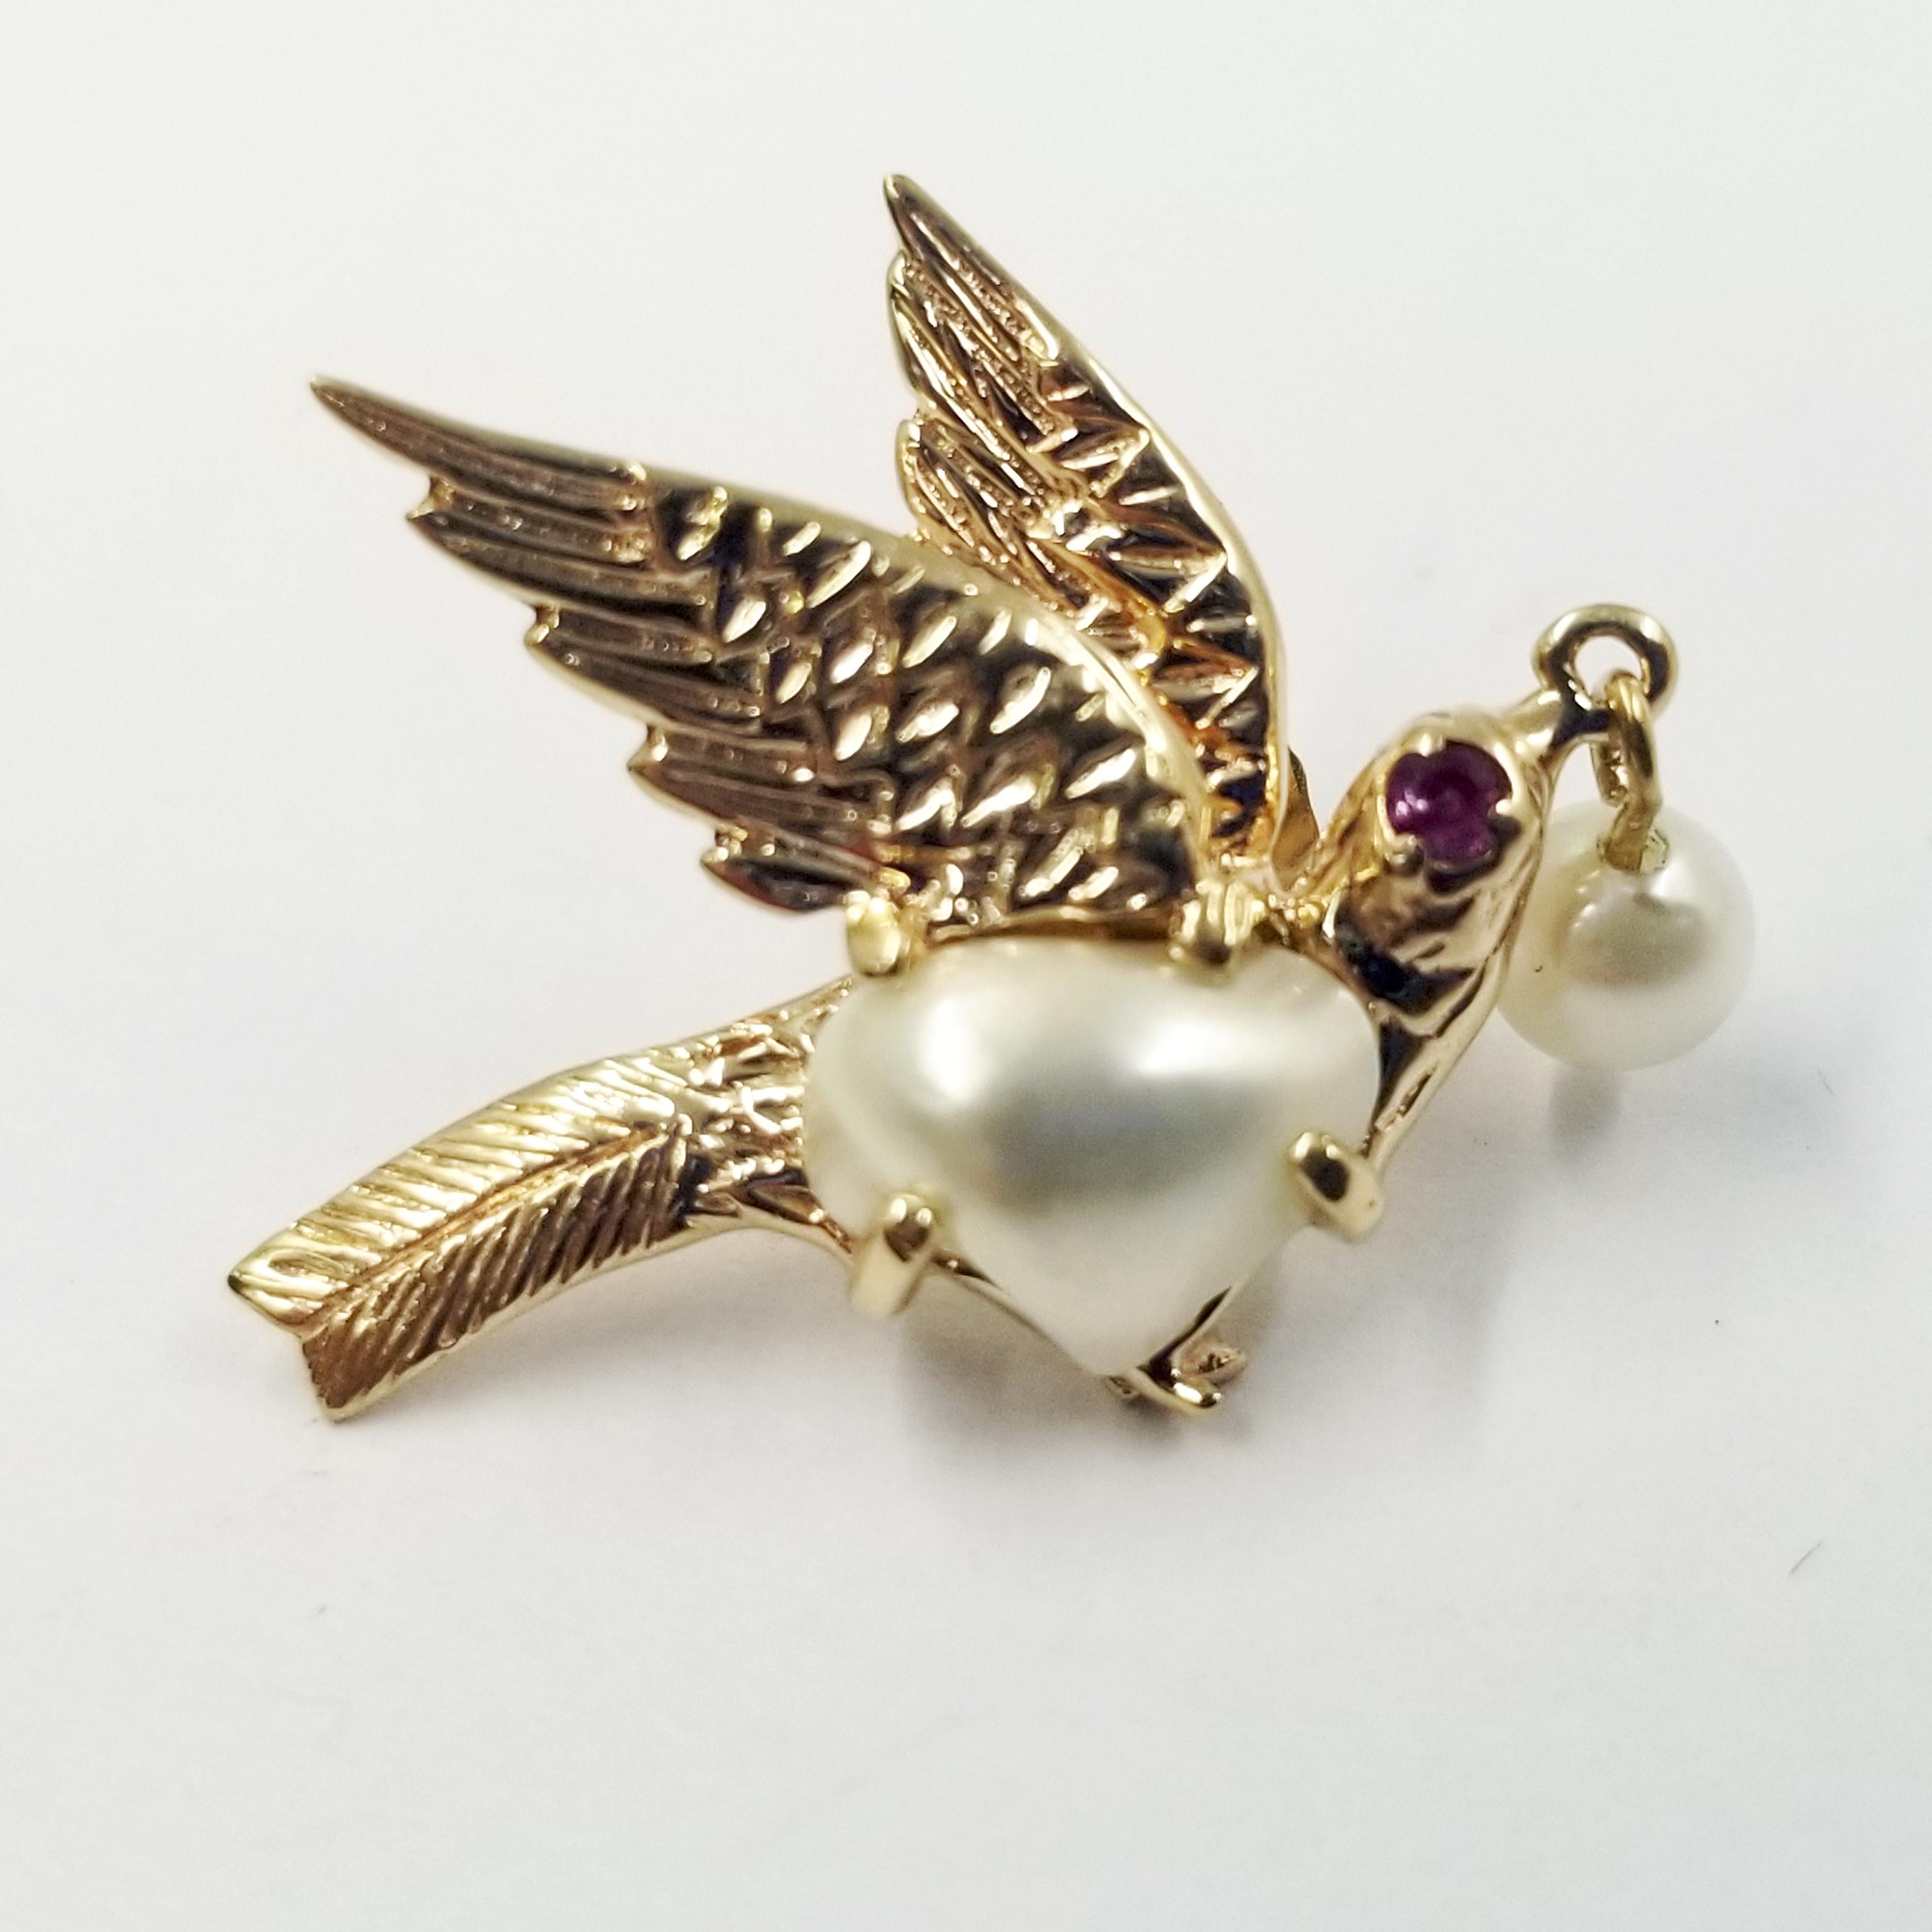 14 Karat Yellow Gold Bird Earrings with Pearls & Ruby Eyes. 2 Baroque Pearls are Prong Set, and 2 Round Pearls Are Drilled and Dangle From The Birds' Mouths on a Gold Wire. Gold is Textured To Show Feather Design. Post with Friction Backs. Finished